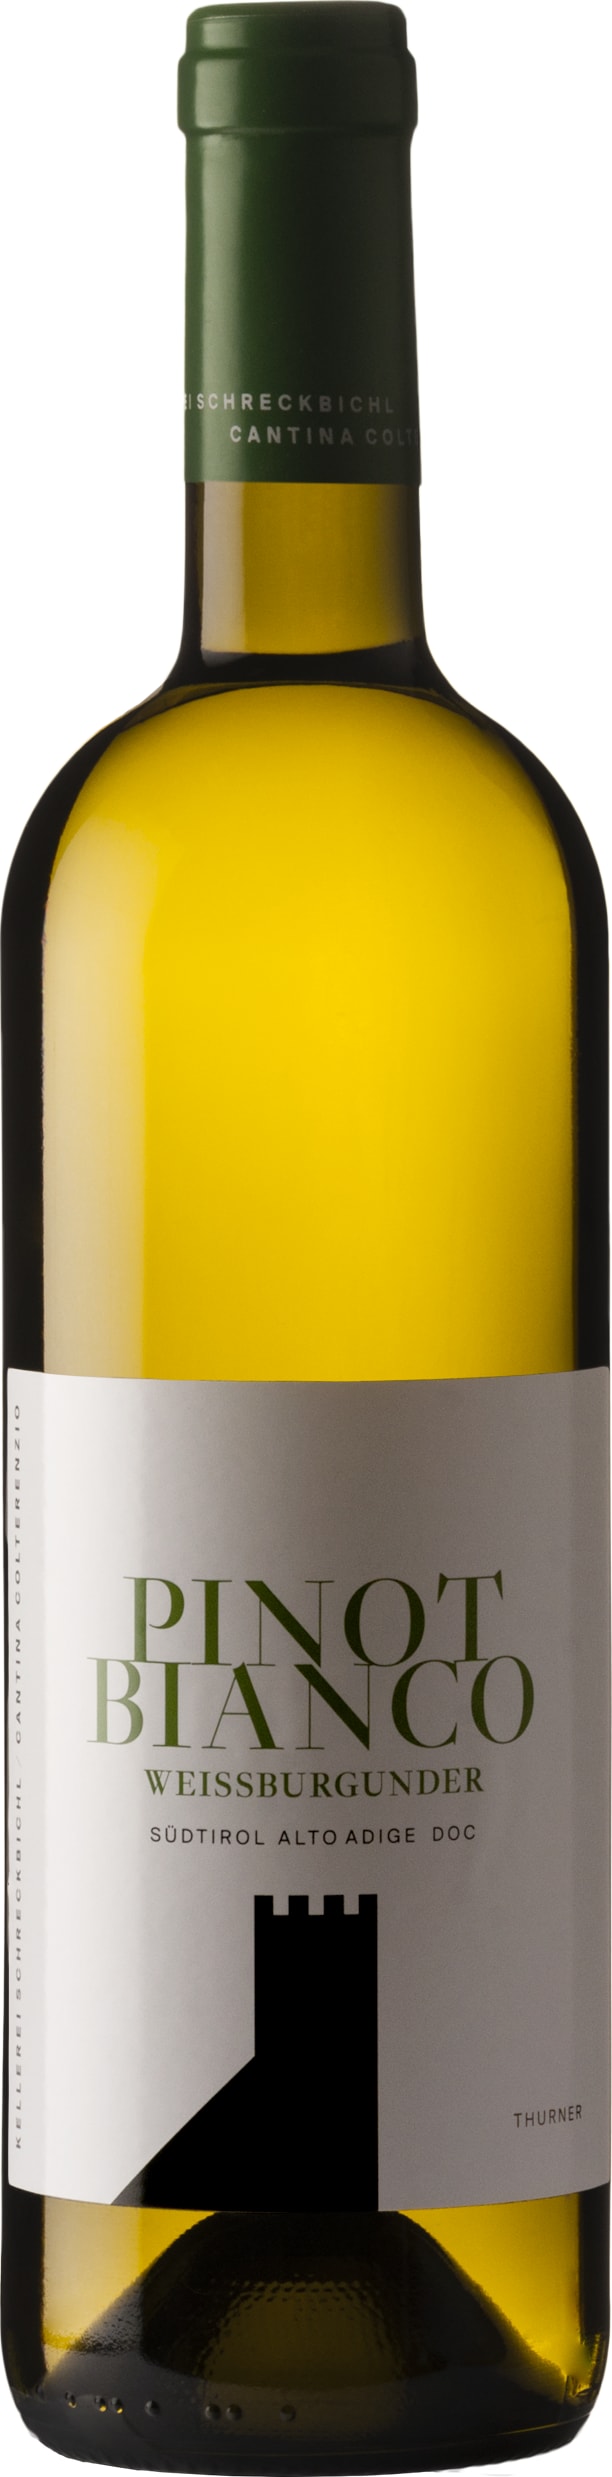 Colterenzio Pinot Bianco Cora DOC 2022 75cl - Buy Colterenzio Wines from GREAT WINES DIRECT wine shop